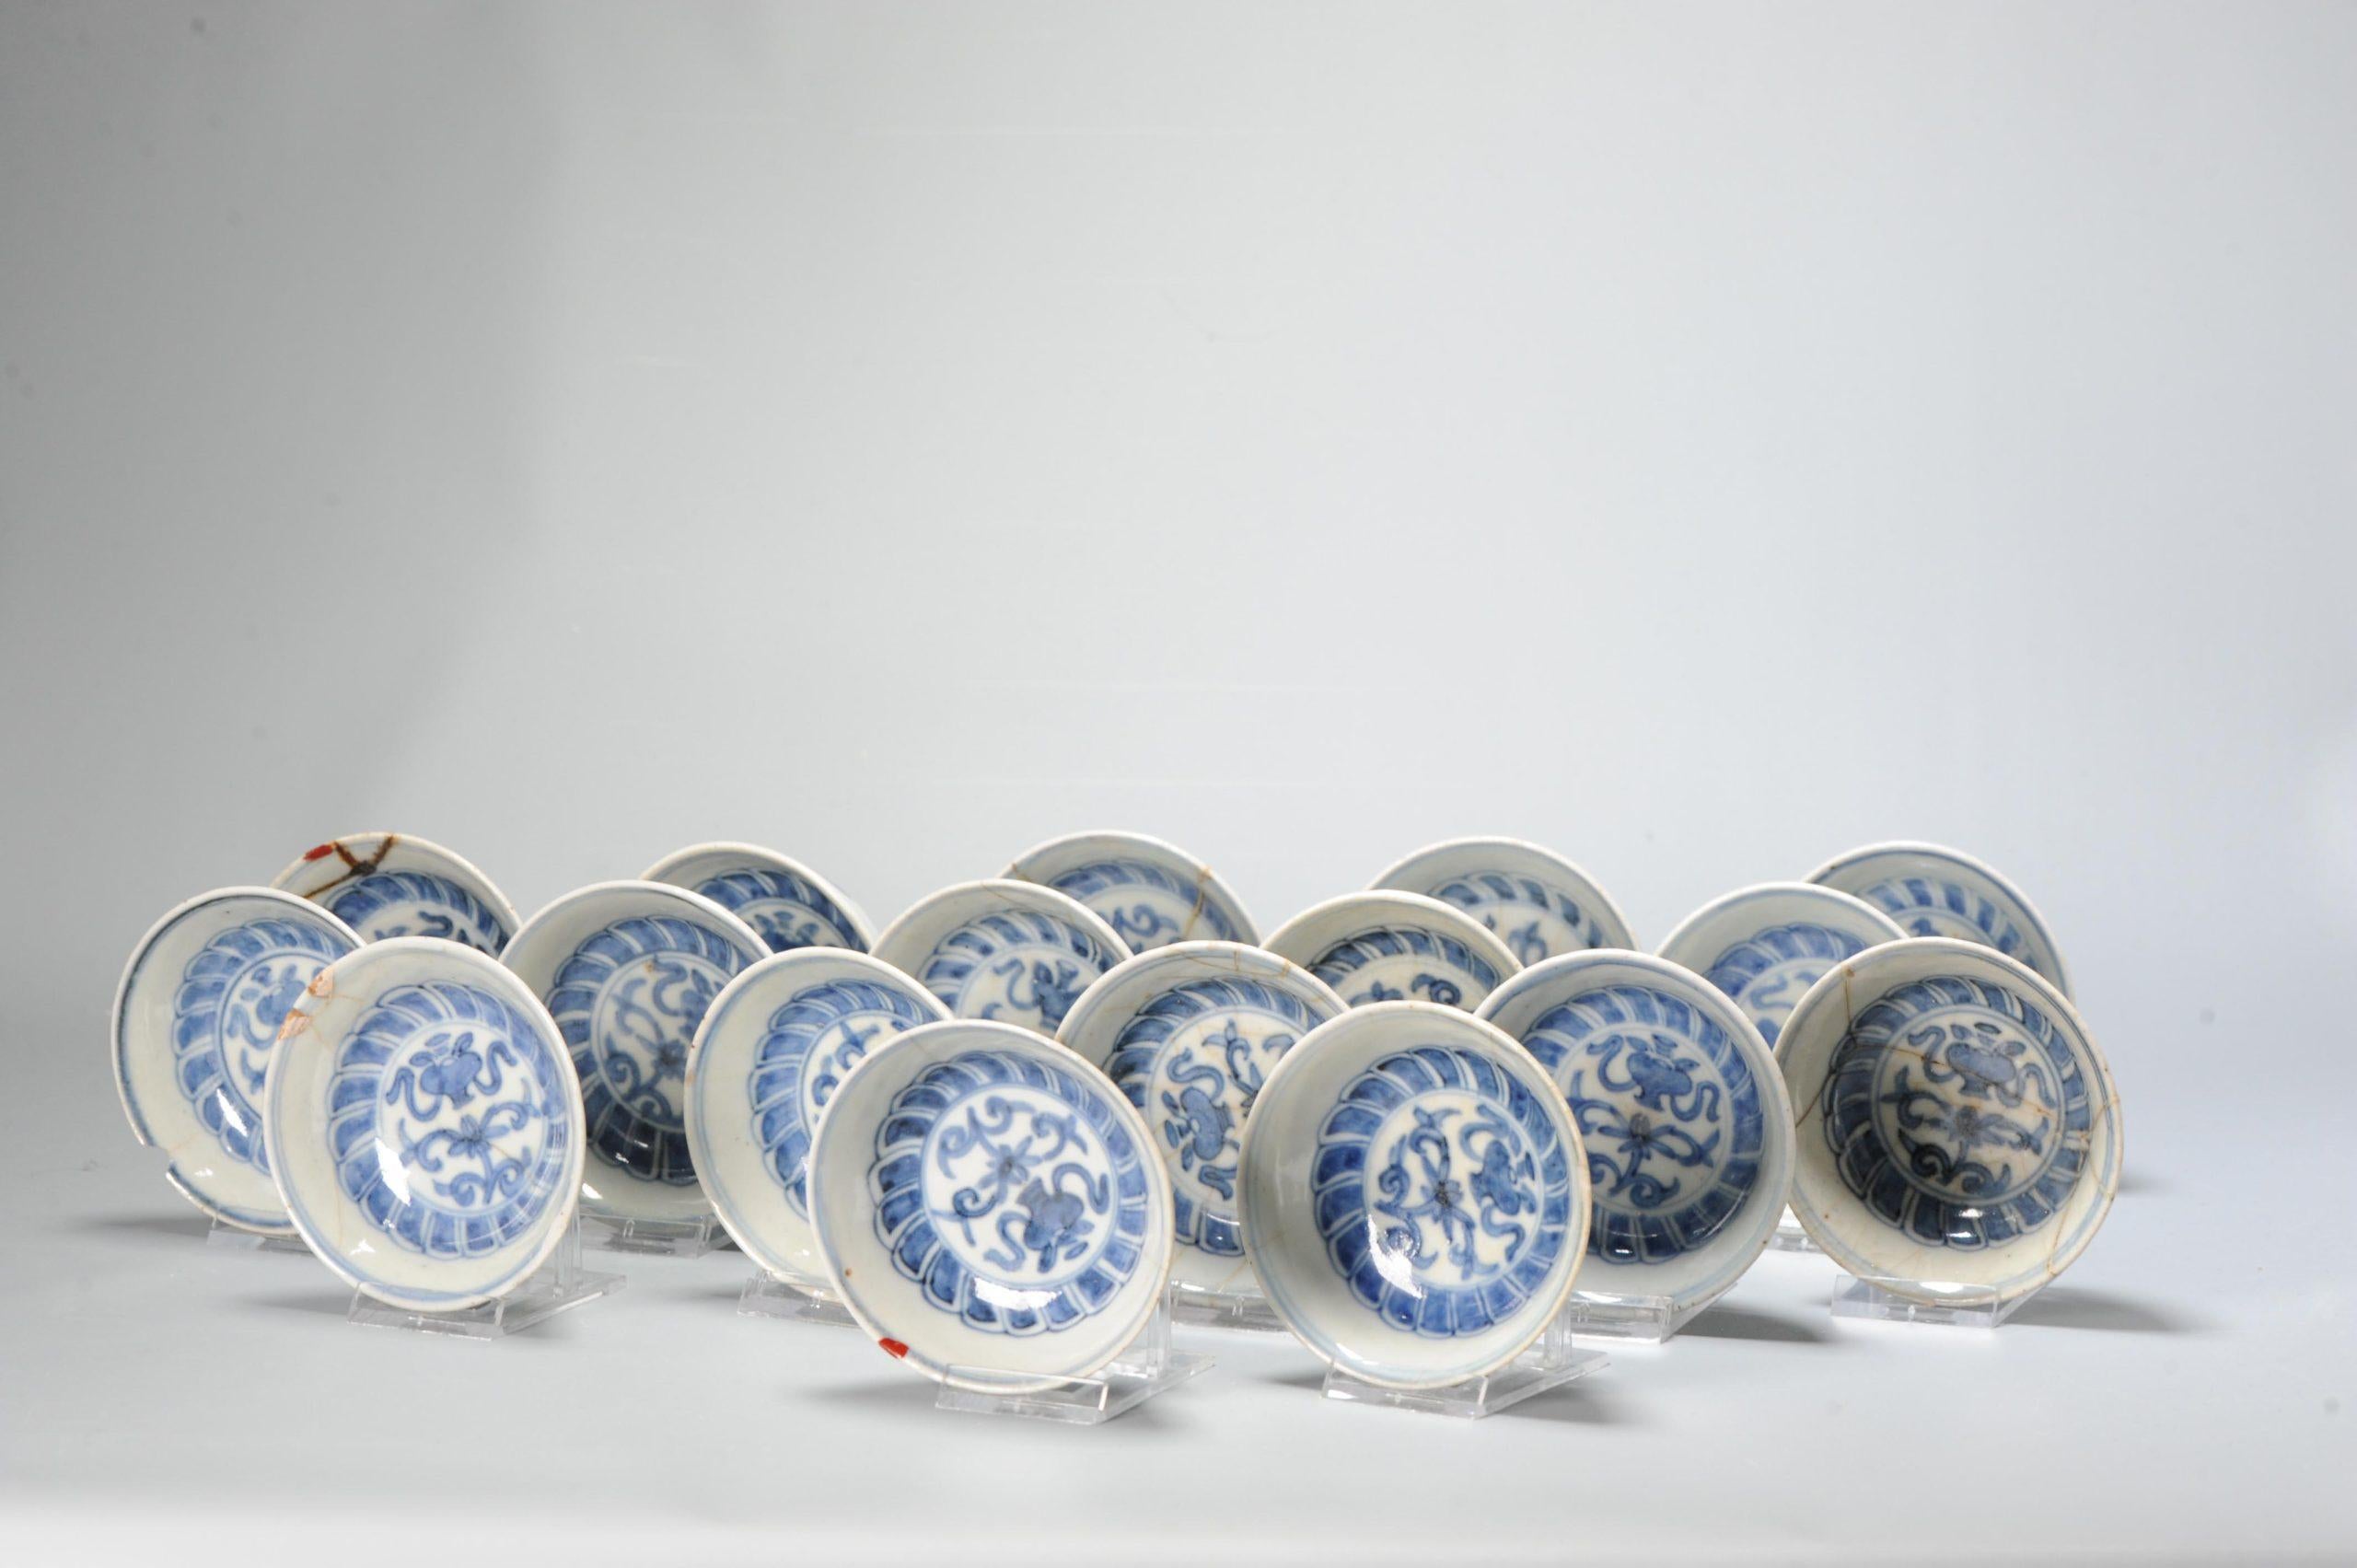 Set of 17 Large Antique Kosometsuke Chinese Ming Dynasty Plates, 17th Century In Good Condition For Sale In Amsterdam, Noord Holland